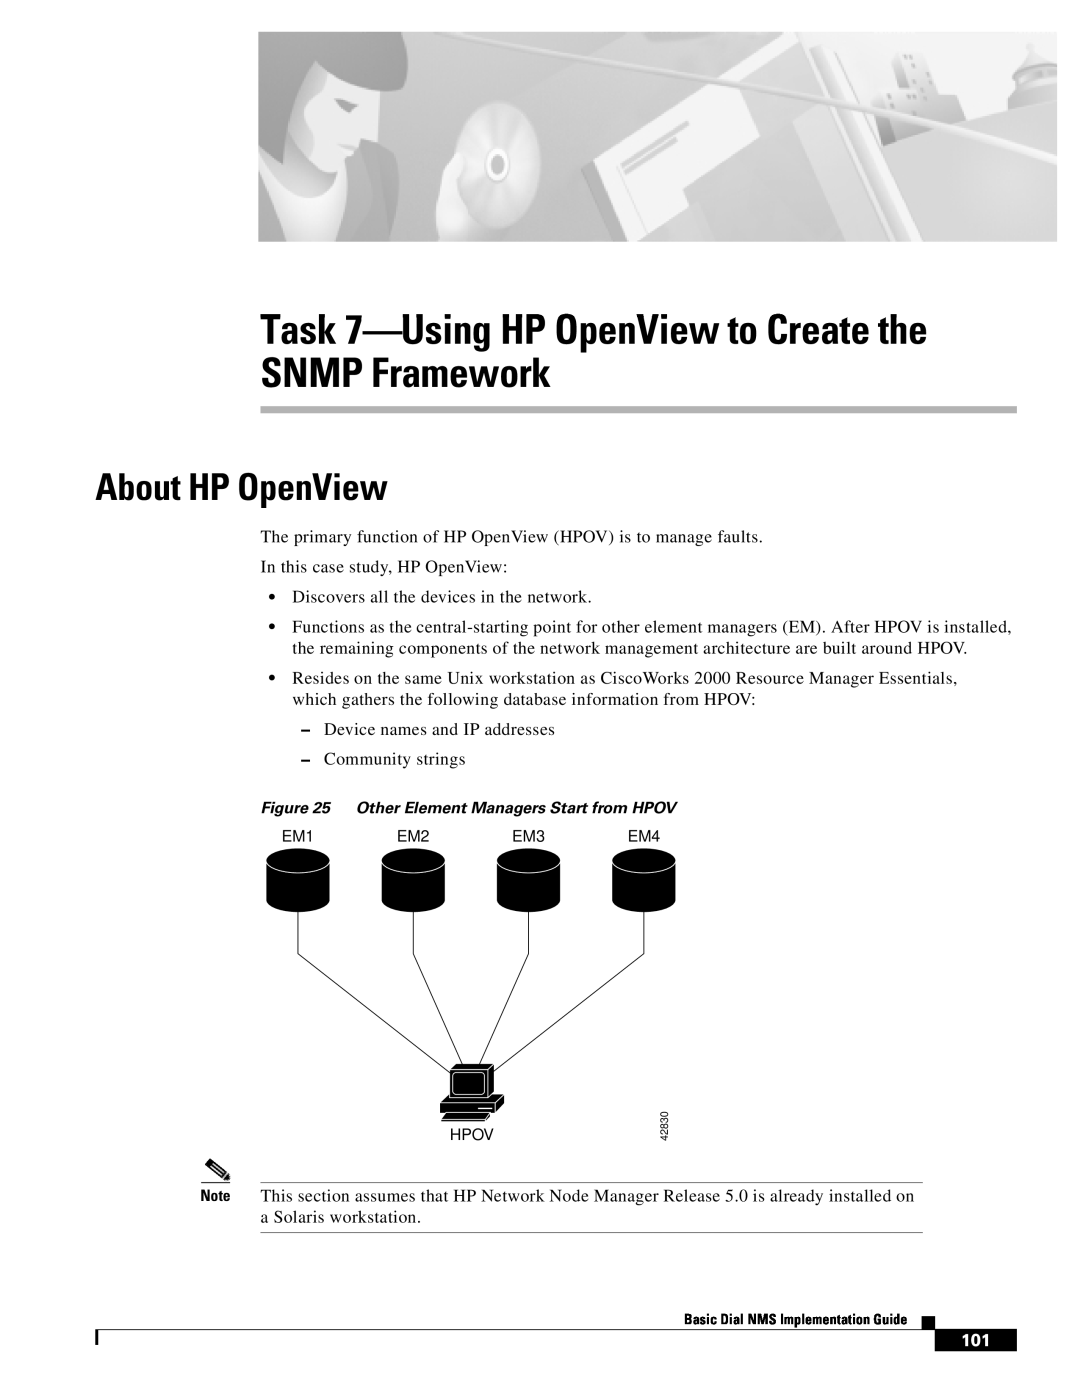 Cisco Systems Dial NMS manual Task 7-Using HP OpenView to Create the SNMP Framework, About HP OpenView 